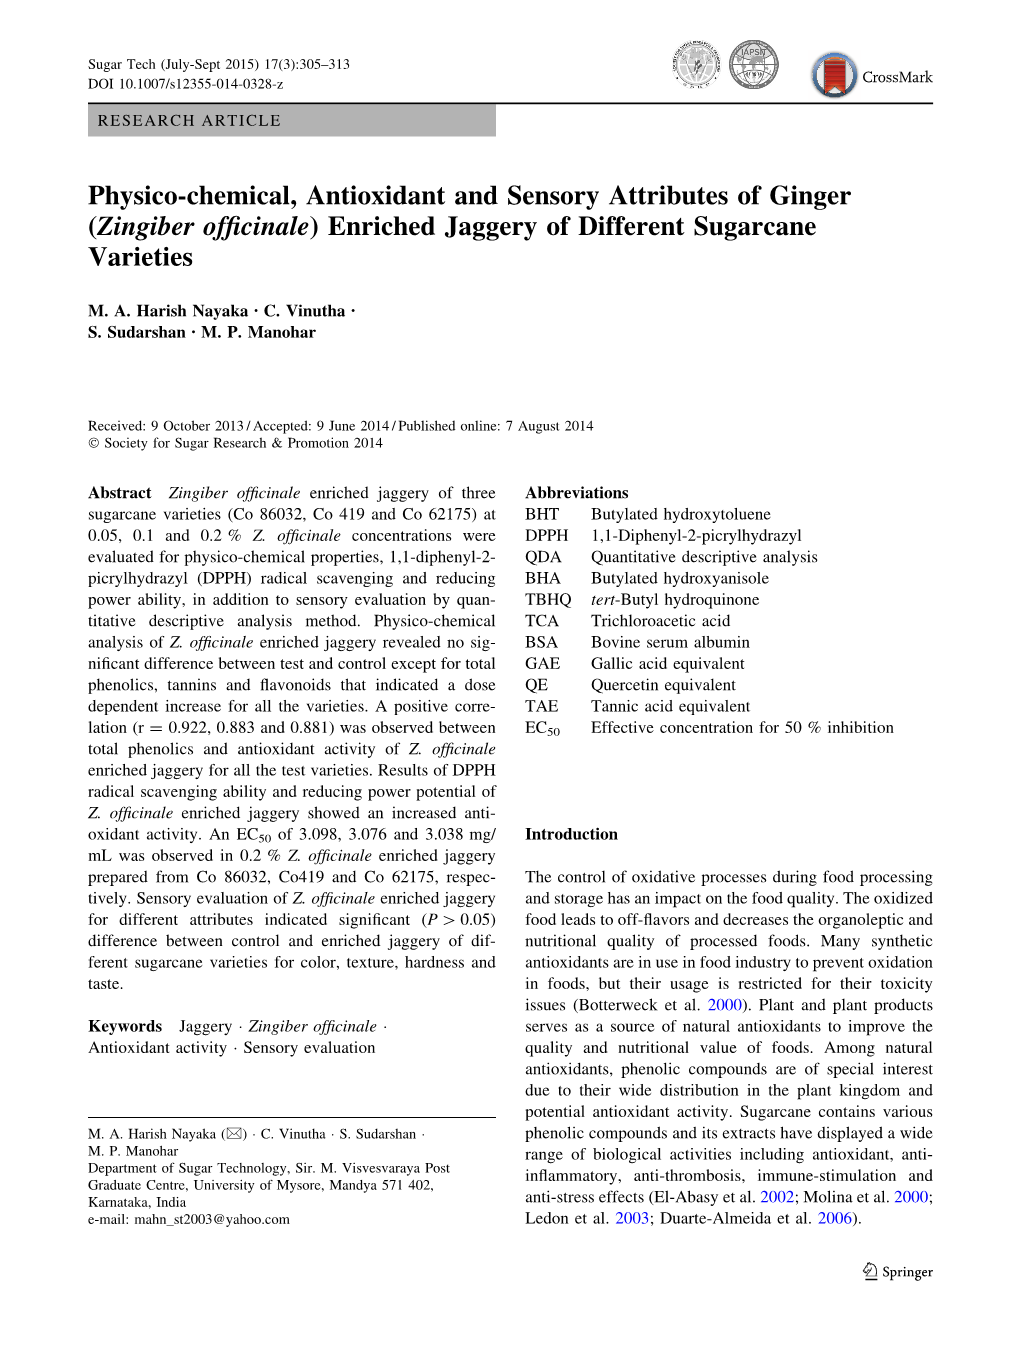 Physico-Chemical, Antioxidant and Sensory Attributes of Ginger (Zingiber Ofﬁcinale) Enriched Jaggery of Different Sugarcane Varieties